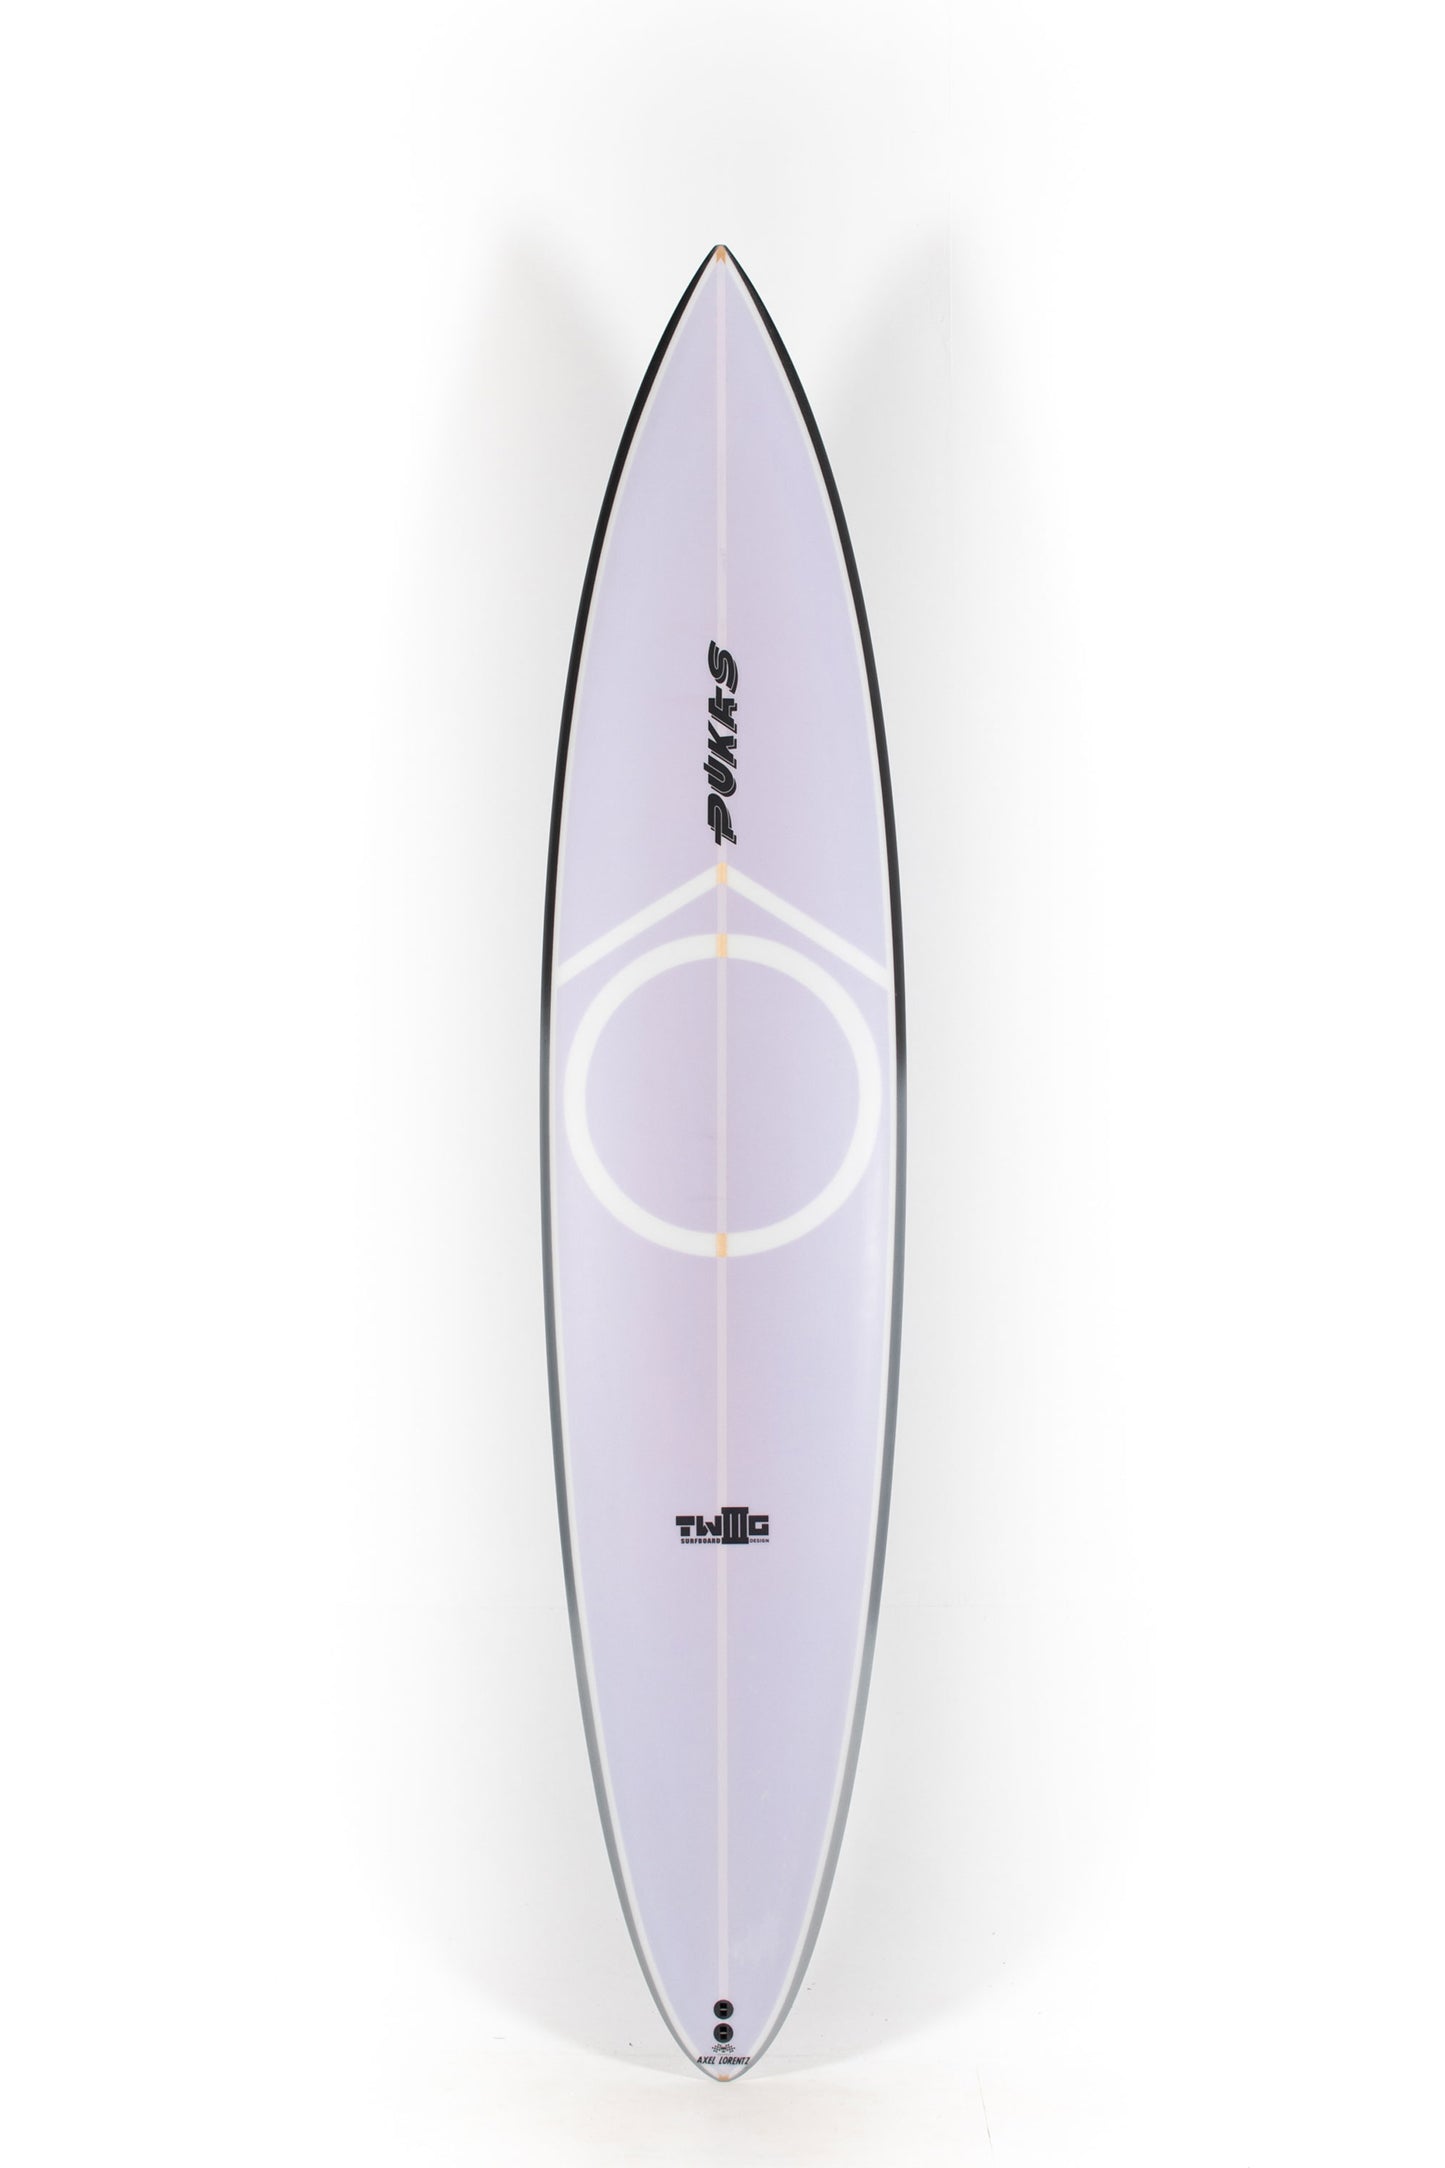 Pukas Surf Shop - Pukas Surfboard - TWIG CHARGER by Axel Lorentz - 8´6” x 20,63 x 3,38 - 59,63L  AX06032